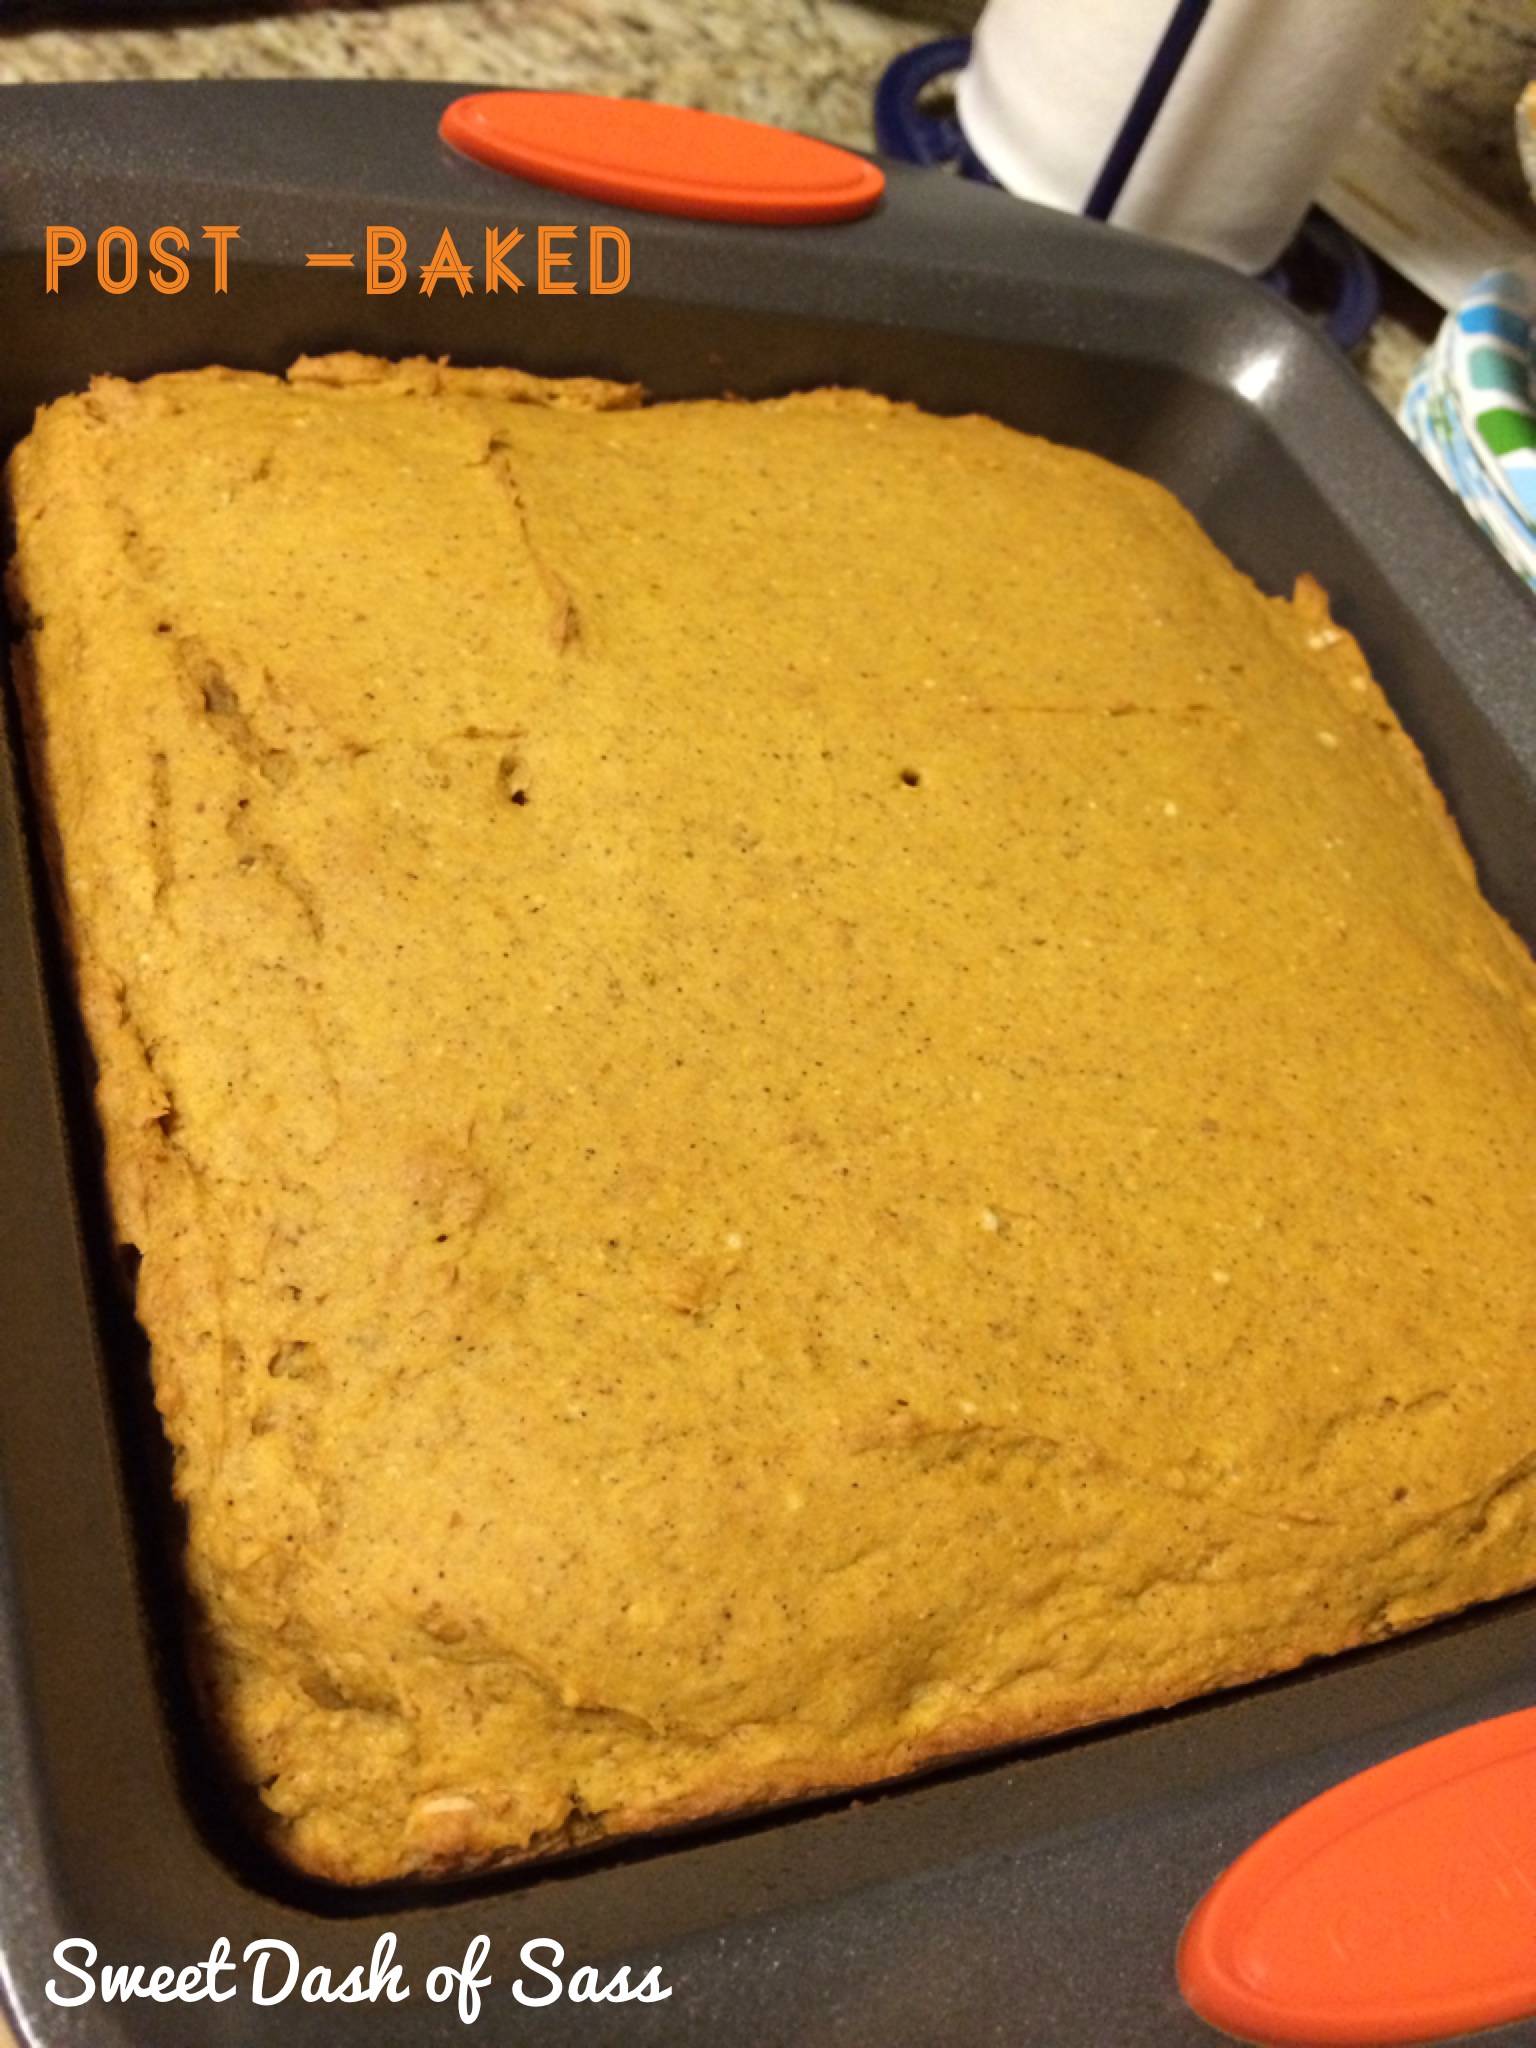 Pumpkin Poke  Cake - www.SweetDashofSass.com -- 'LIKE' Sweet Dash of Sass on Facebook to  Check out this recipe and many more!